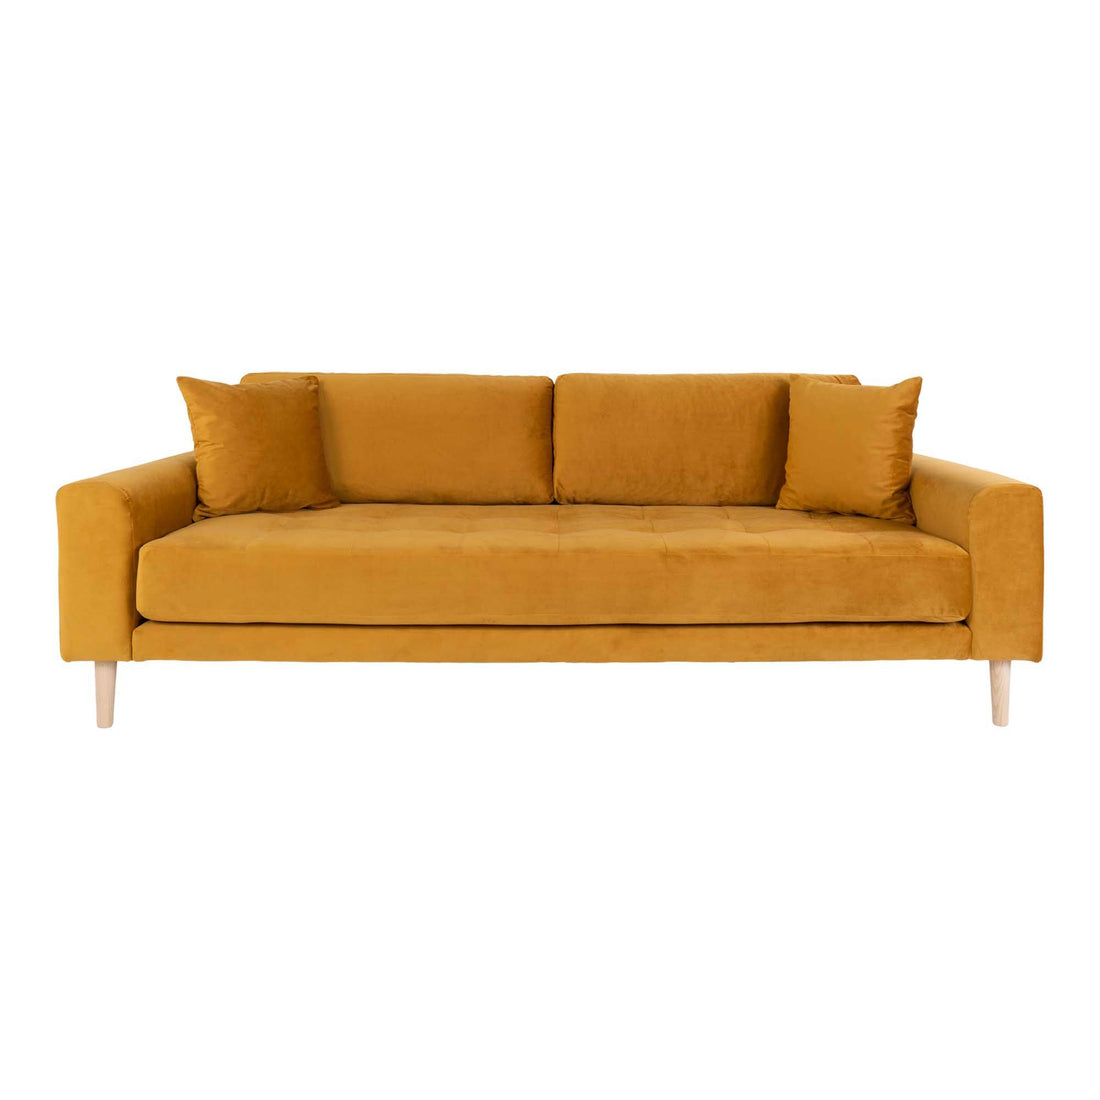 Lido 3 person sofa - 3 person sofa in velor, mustard yellow with two pillows and nature wooden legs, HN1004 - 1 - pcs